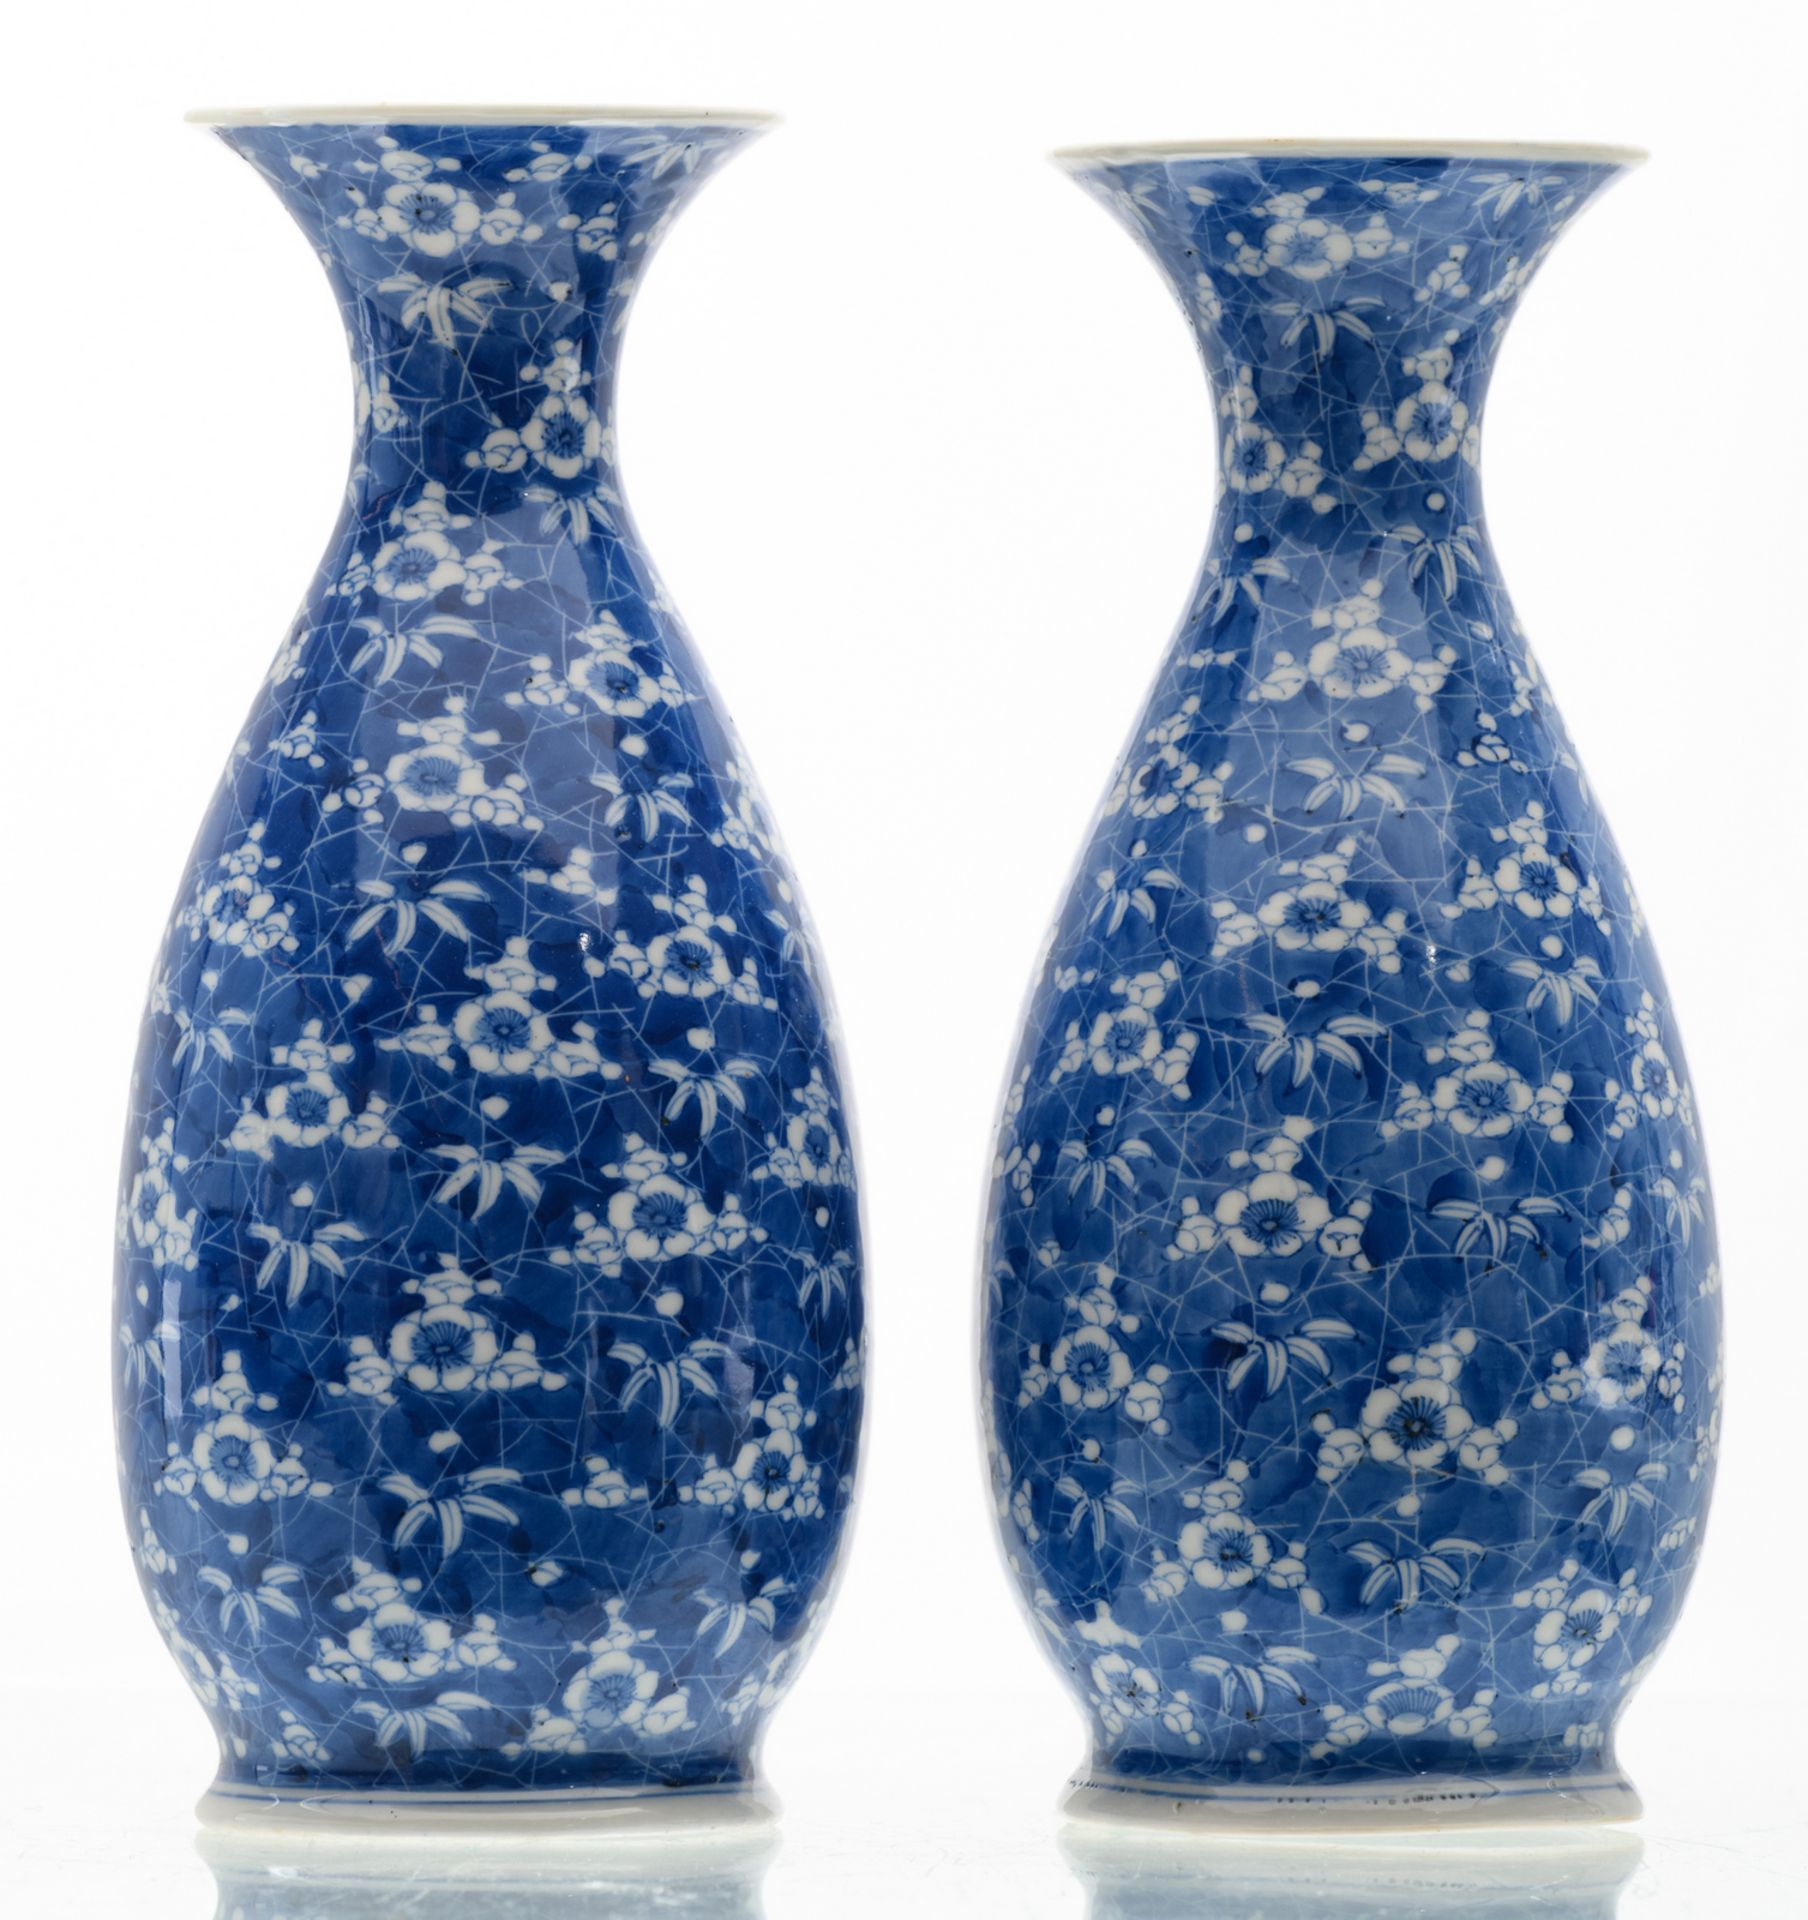 Two Japanese blue and white floral decorated vases, marked, Meiji and period, H 26 cm - Image 3 of 6